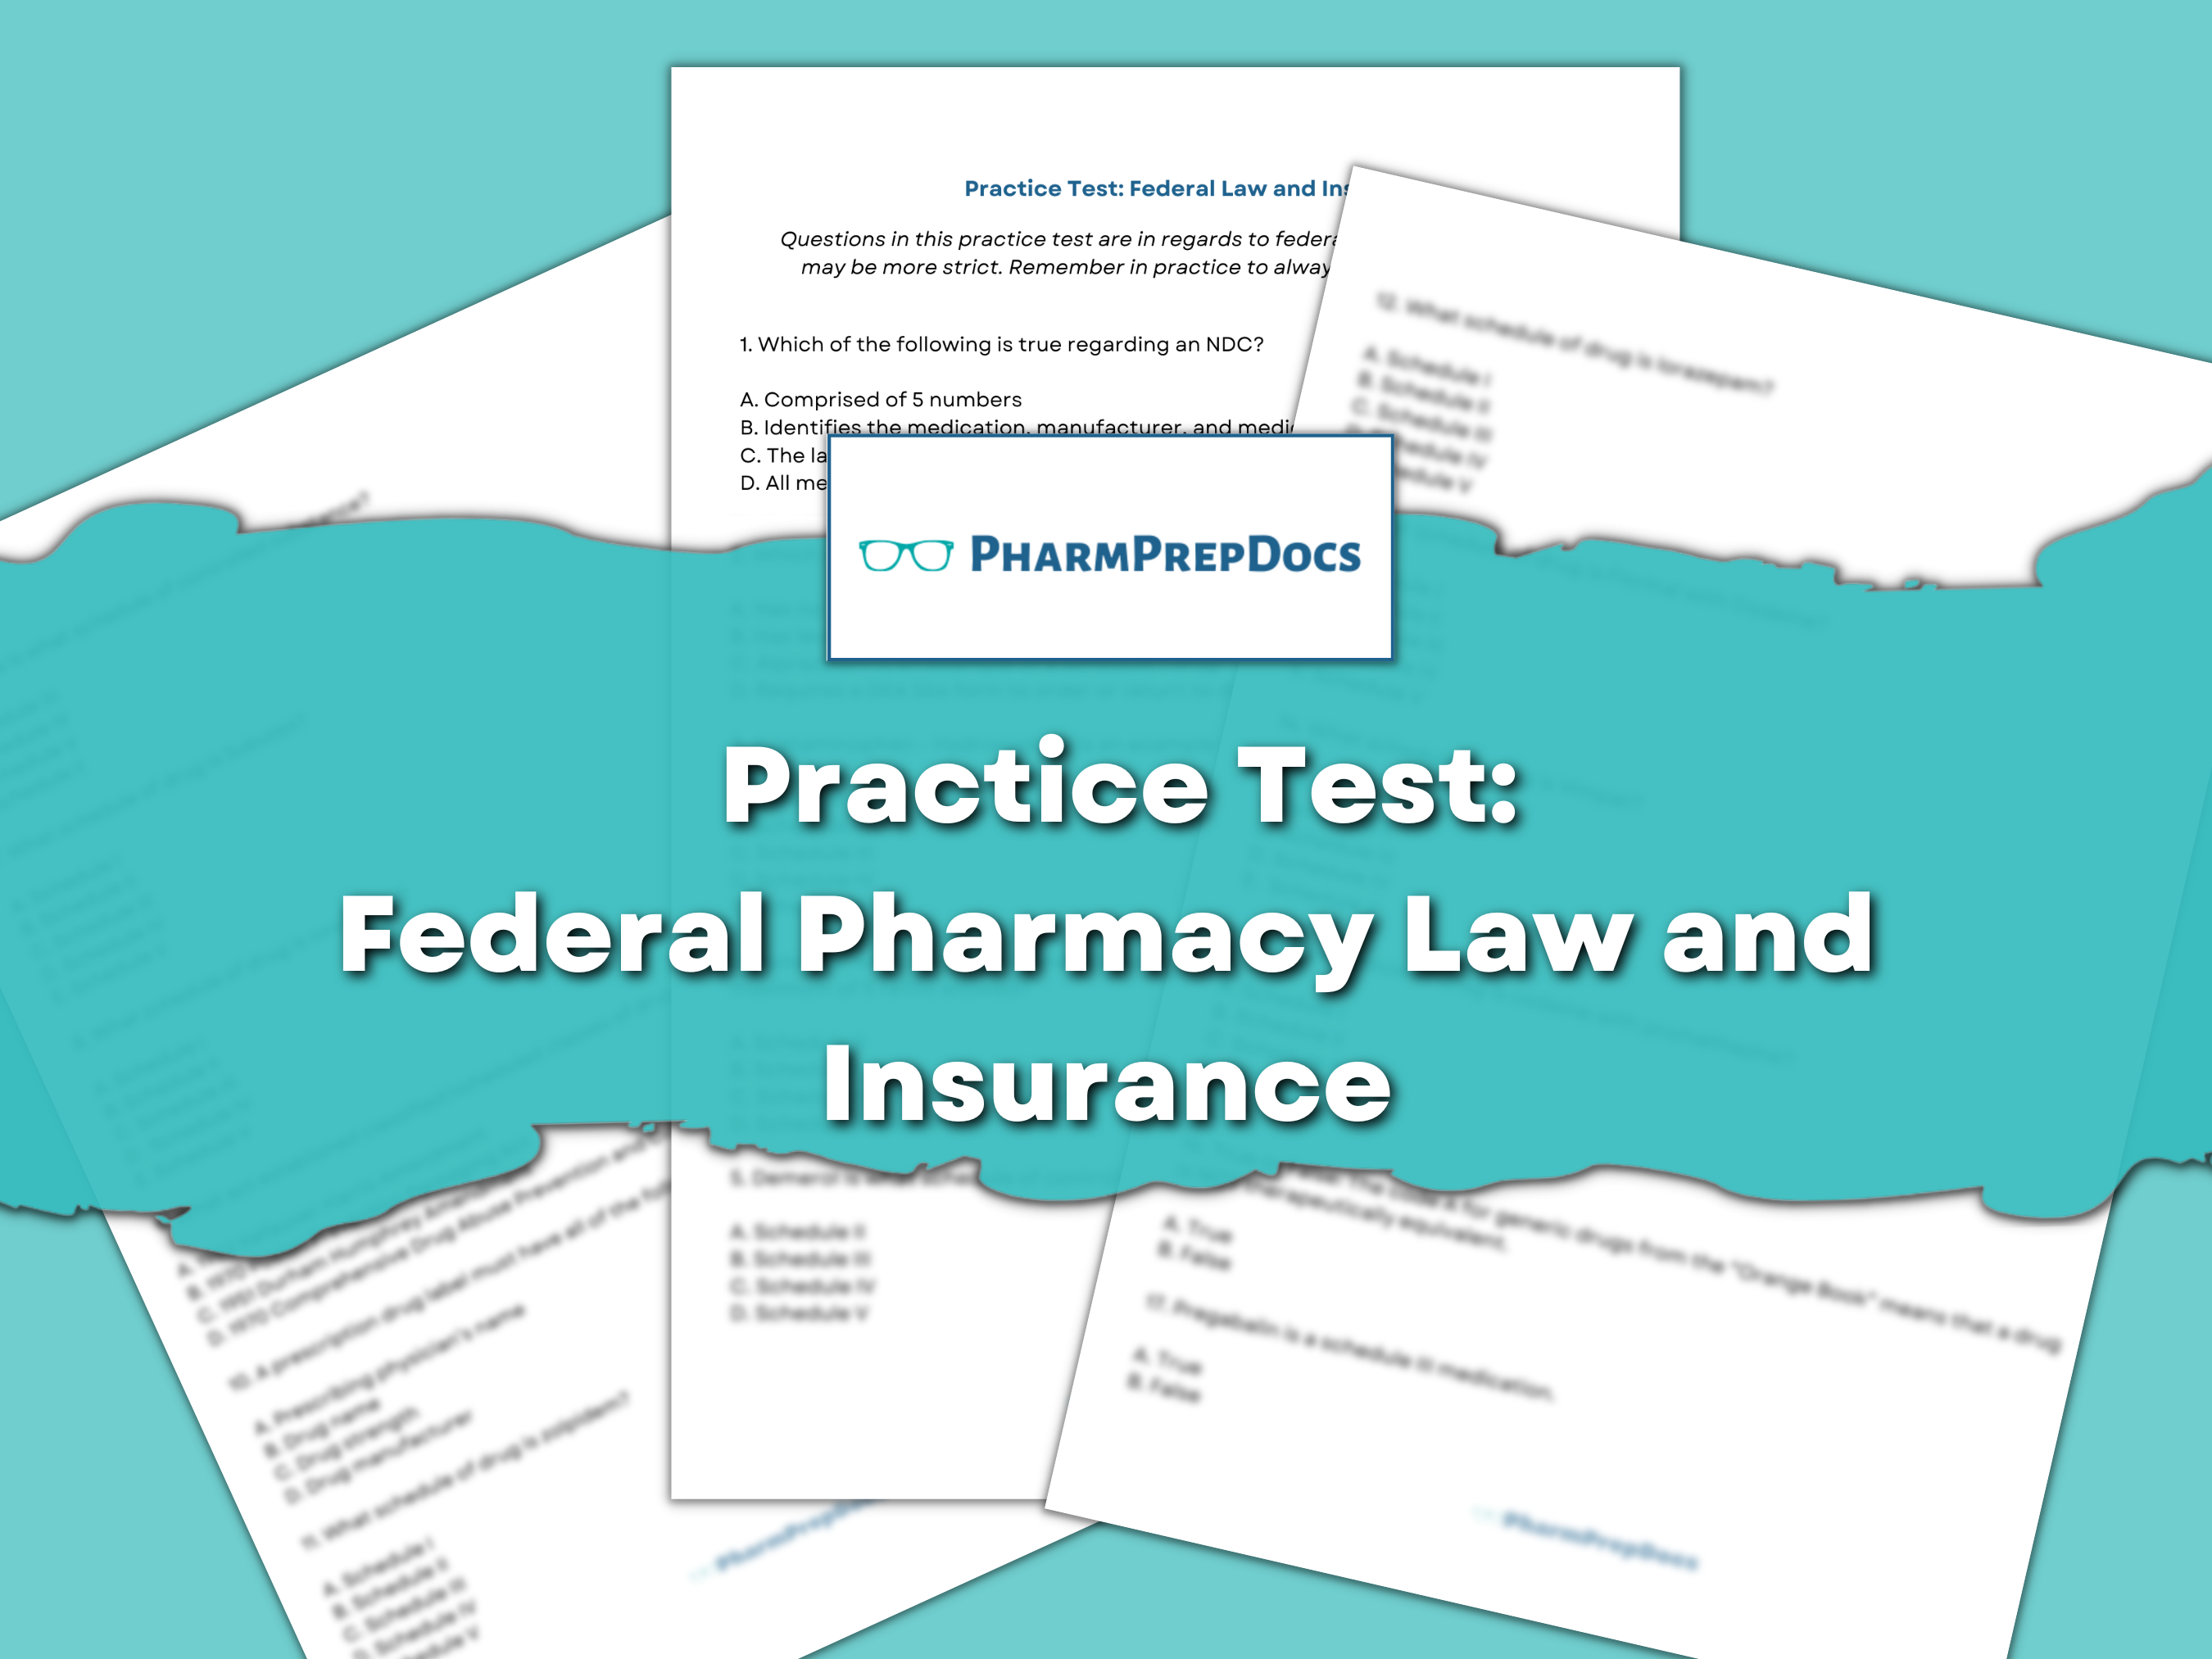 Practice Test: Federal Pharmacy Law and Insurance